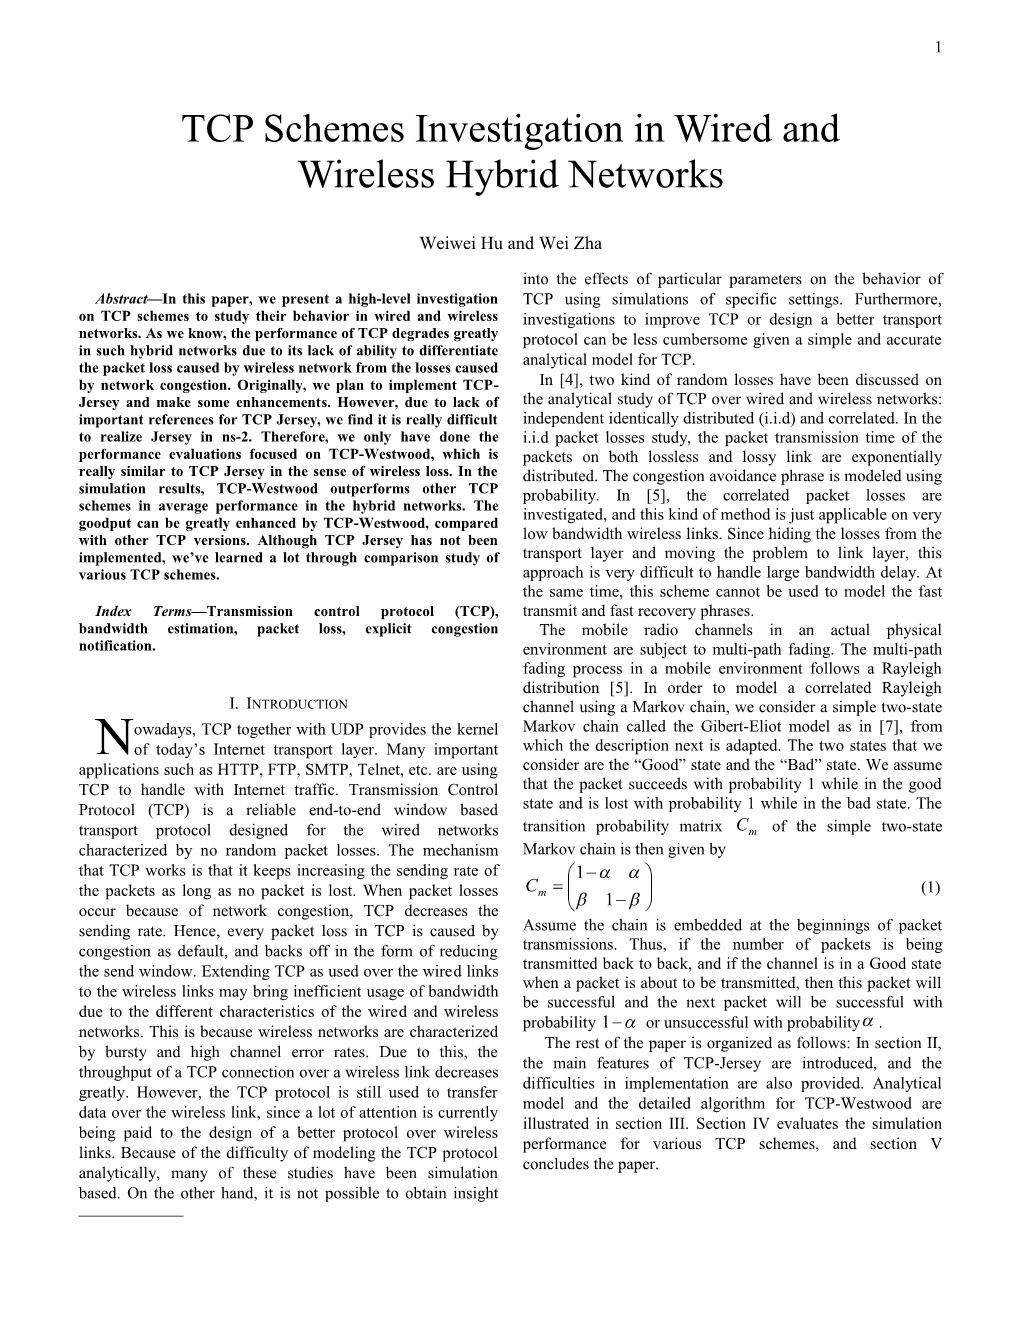 TCP Schemes Investigation in Wired and Wireless Hybrid Networks